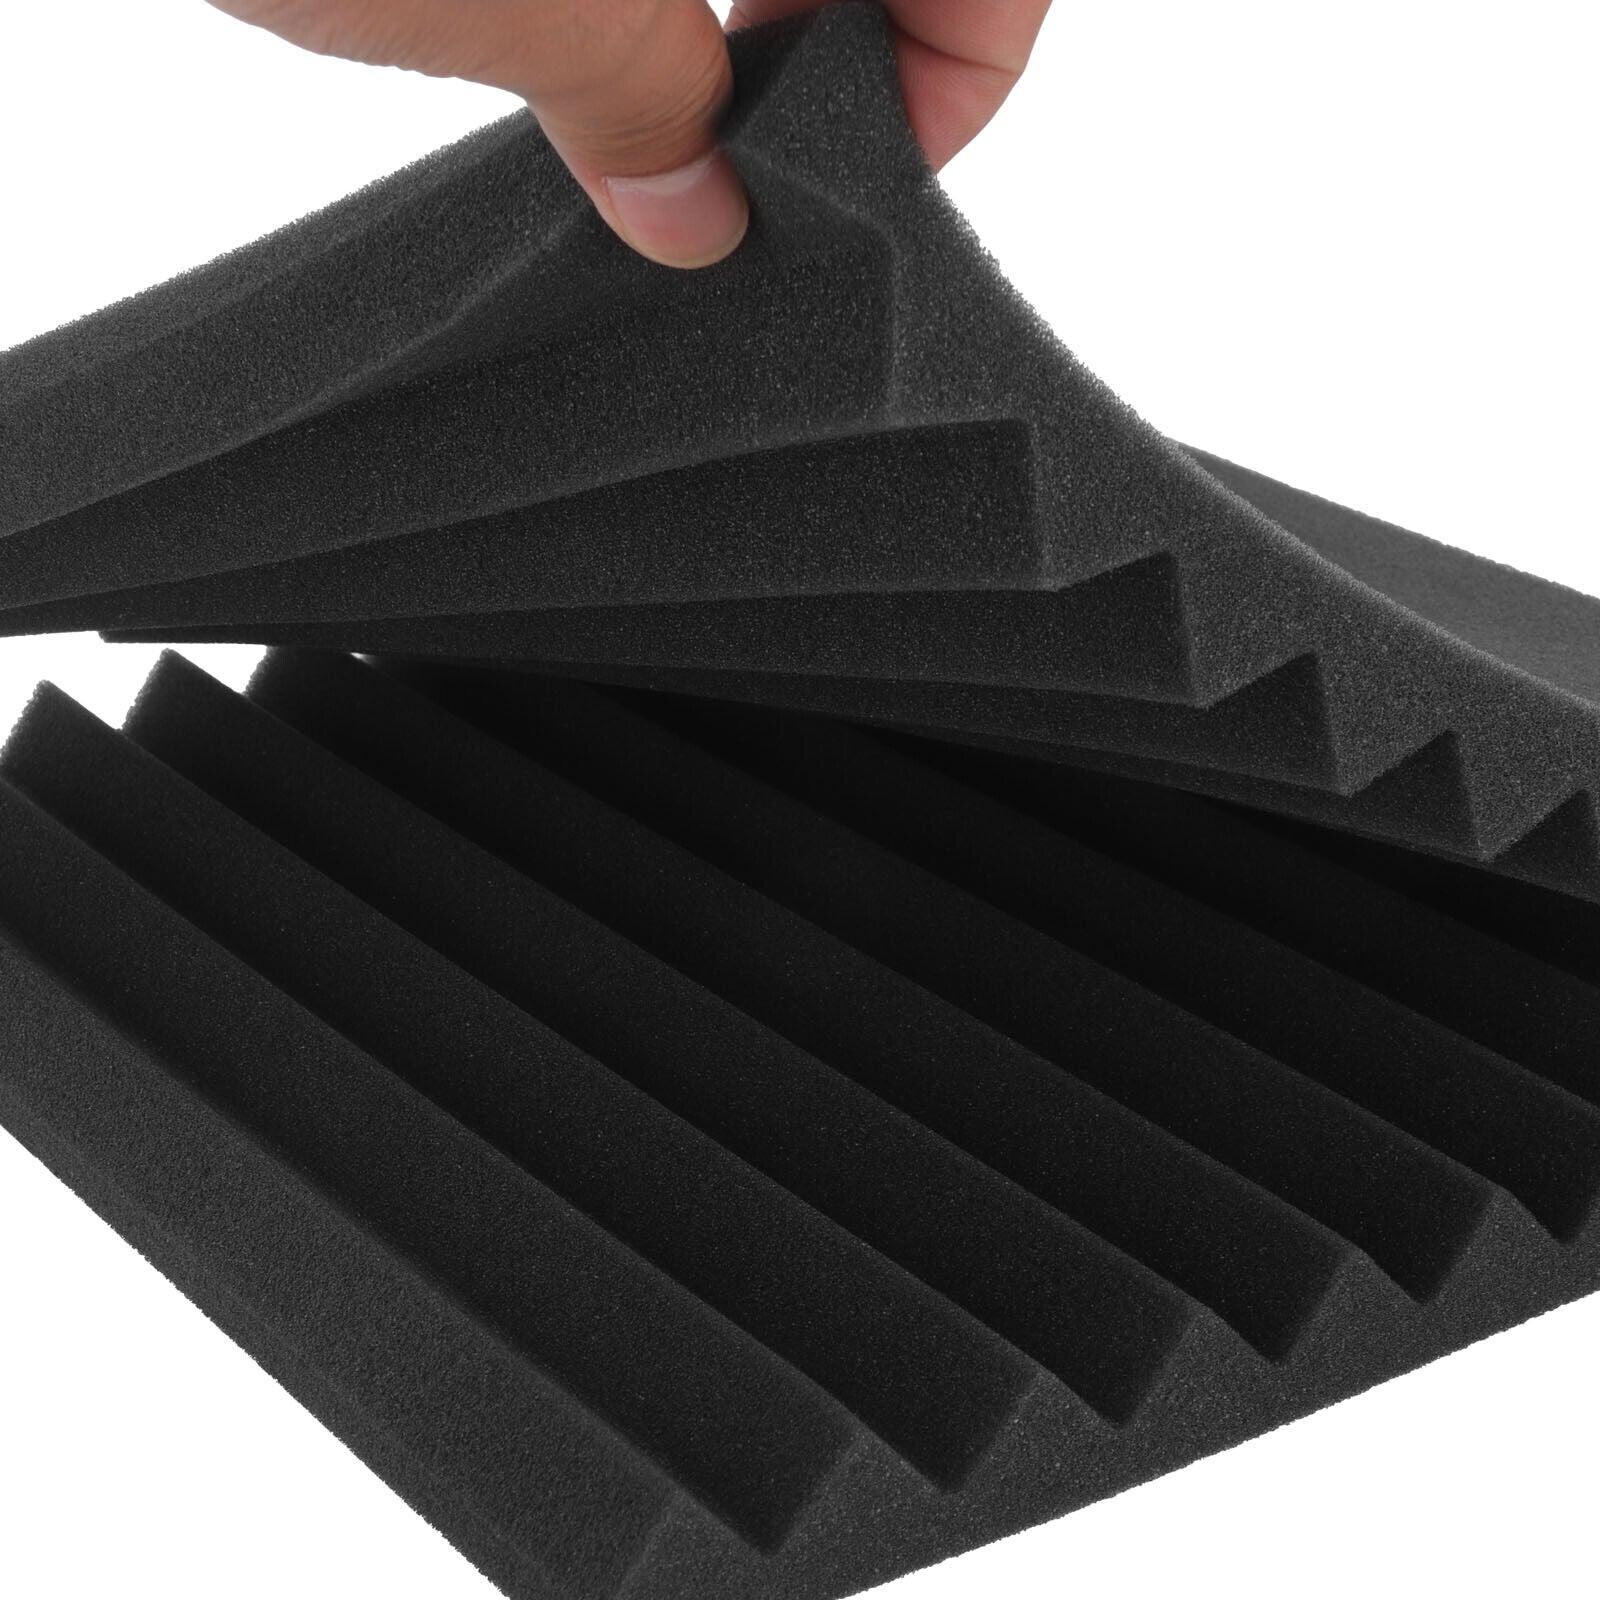 96 Pack | Studio Acoustic Foam Sound Absorbtion Proofing Panels Tiles Wedge | 30*30*2.5cm - Office Catch